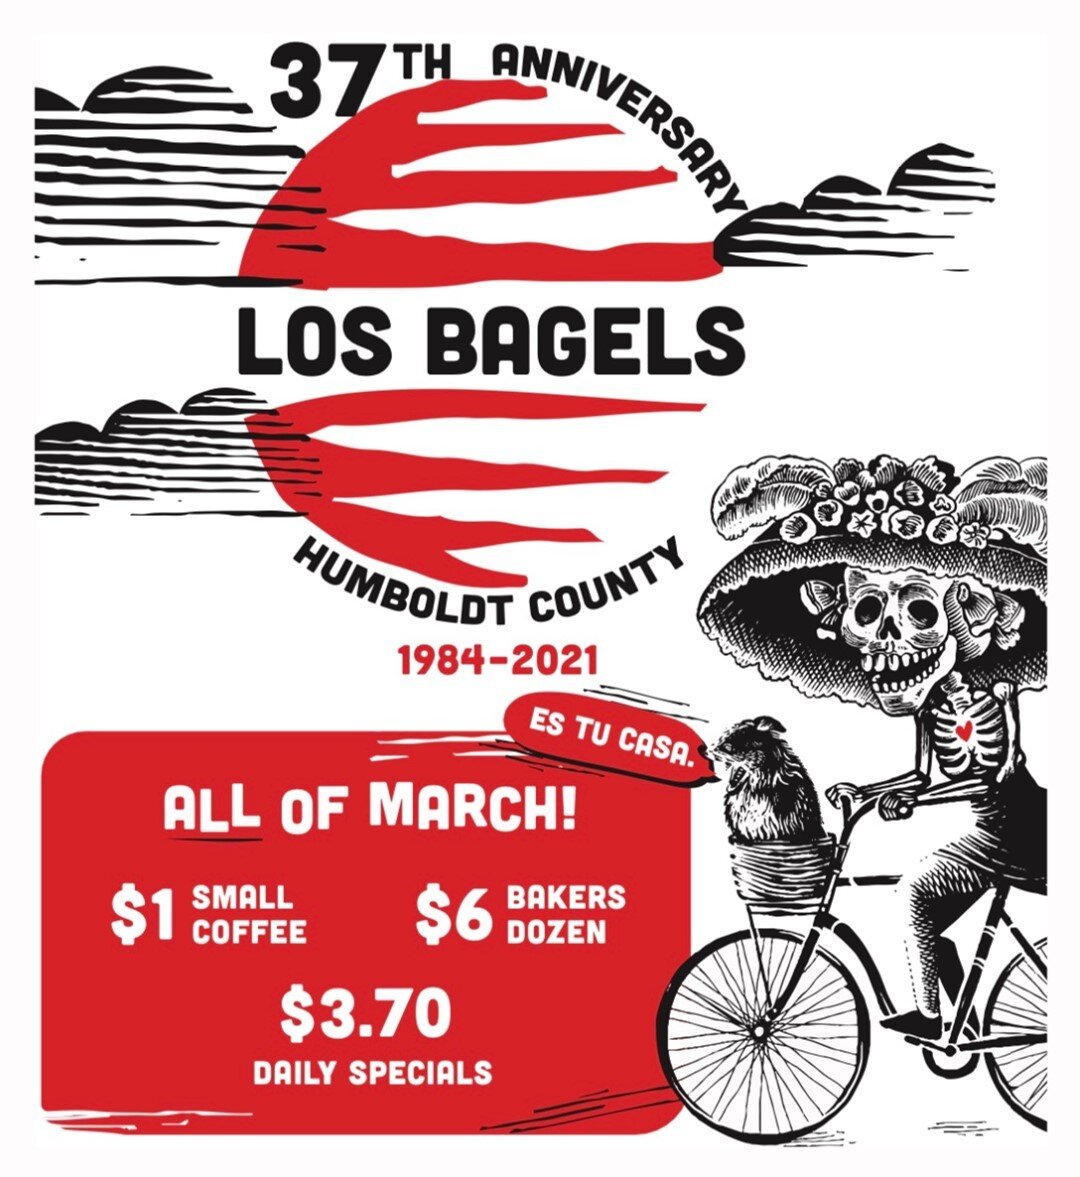 37 years ago, on March 1st, 1984 Los Bagels opened its doors for the first time! We are celebrating our Anniversary all month long with deals on coffee &amp; bagels! Open daily from 7-2, stop by and check it out!